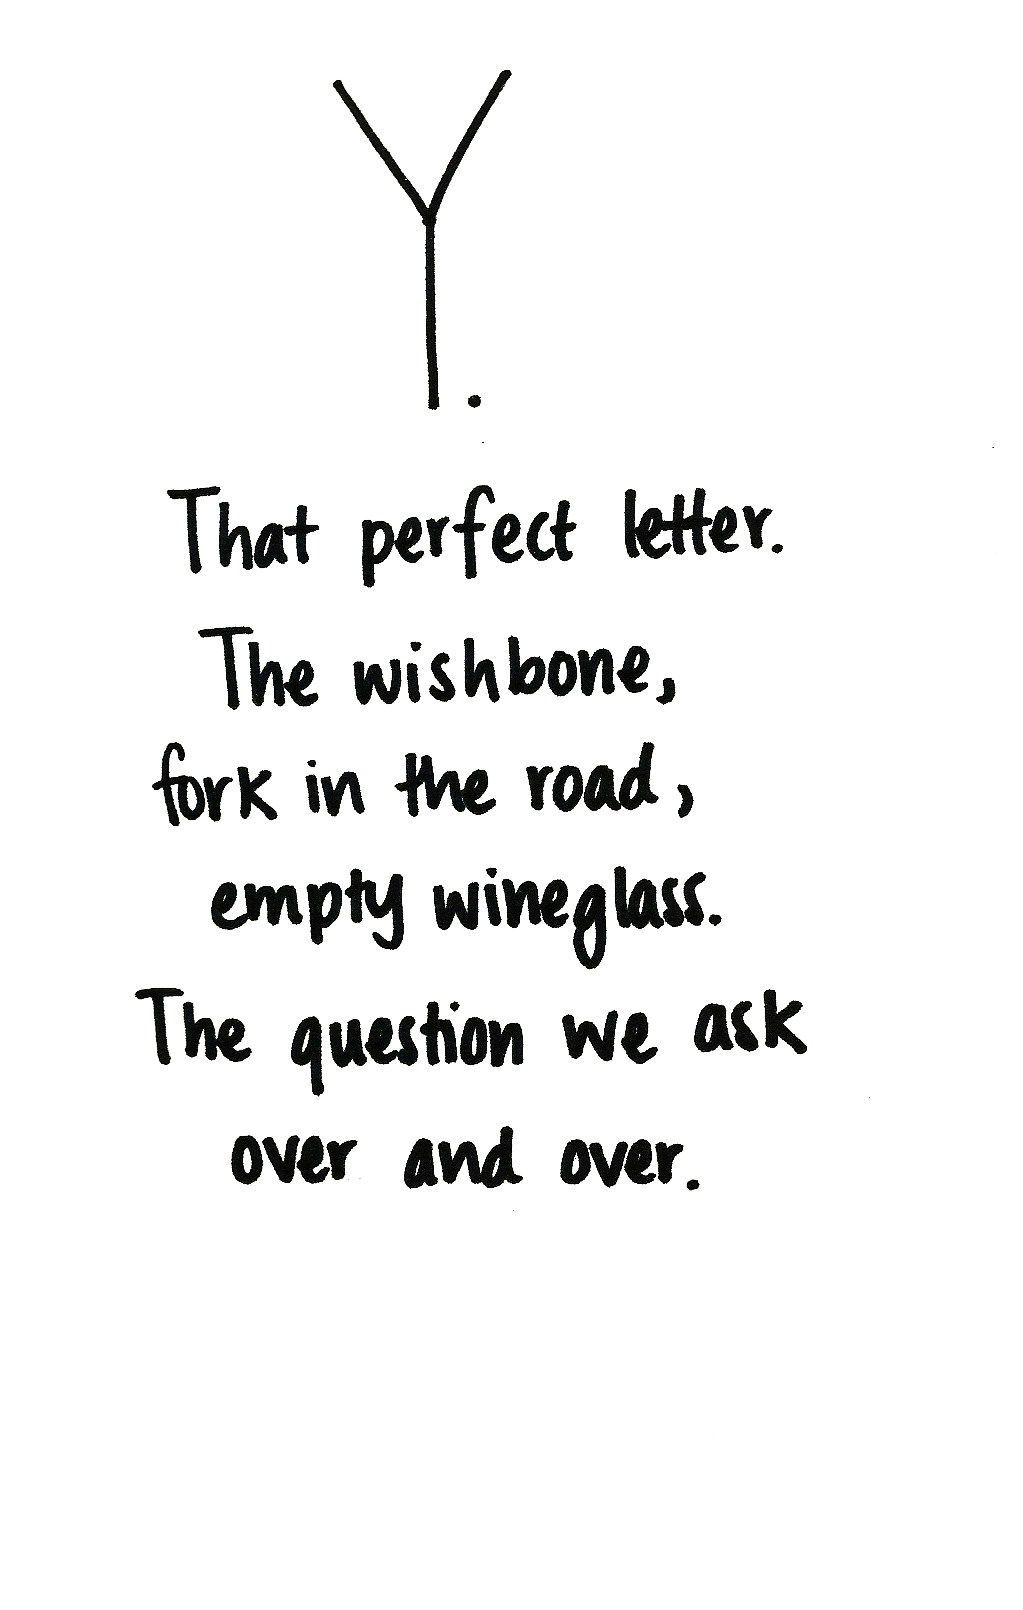 Y- The perfect letter. The wishbone, fork in the road, empty wineglass. The ques